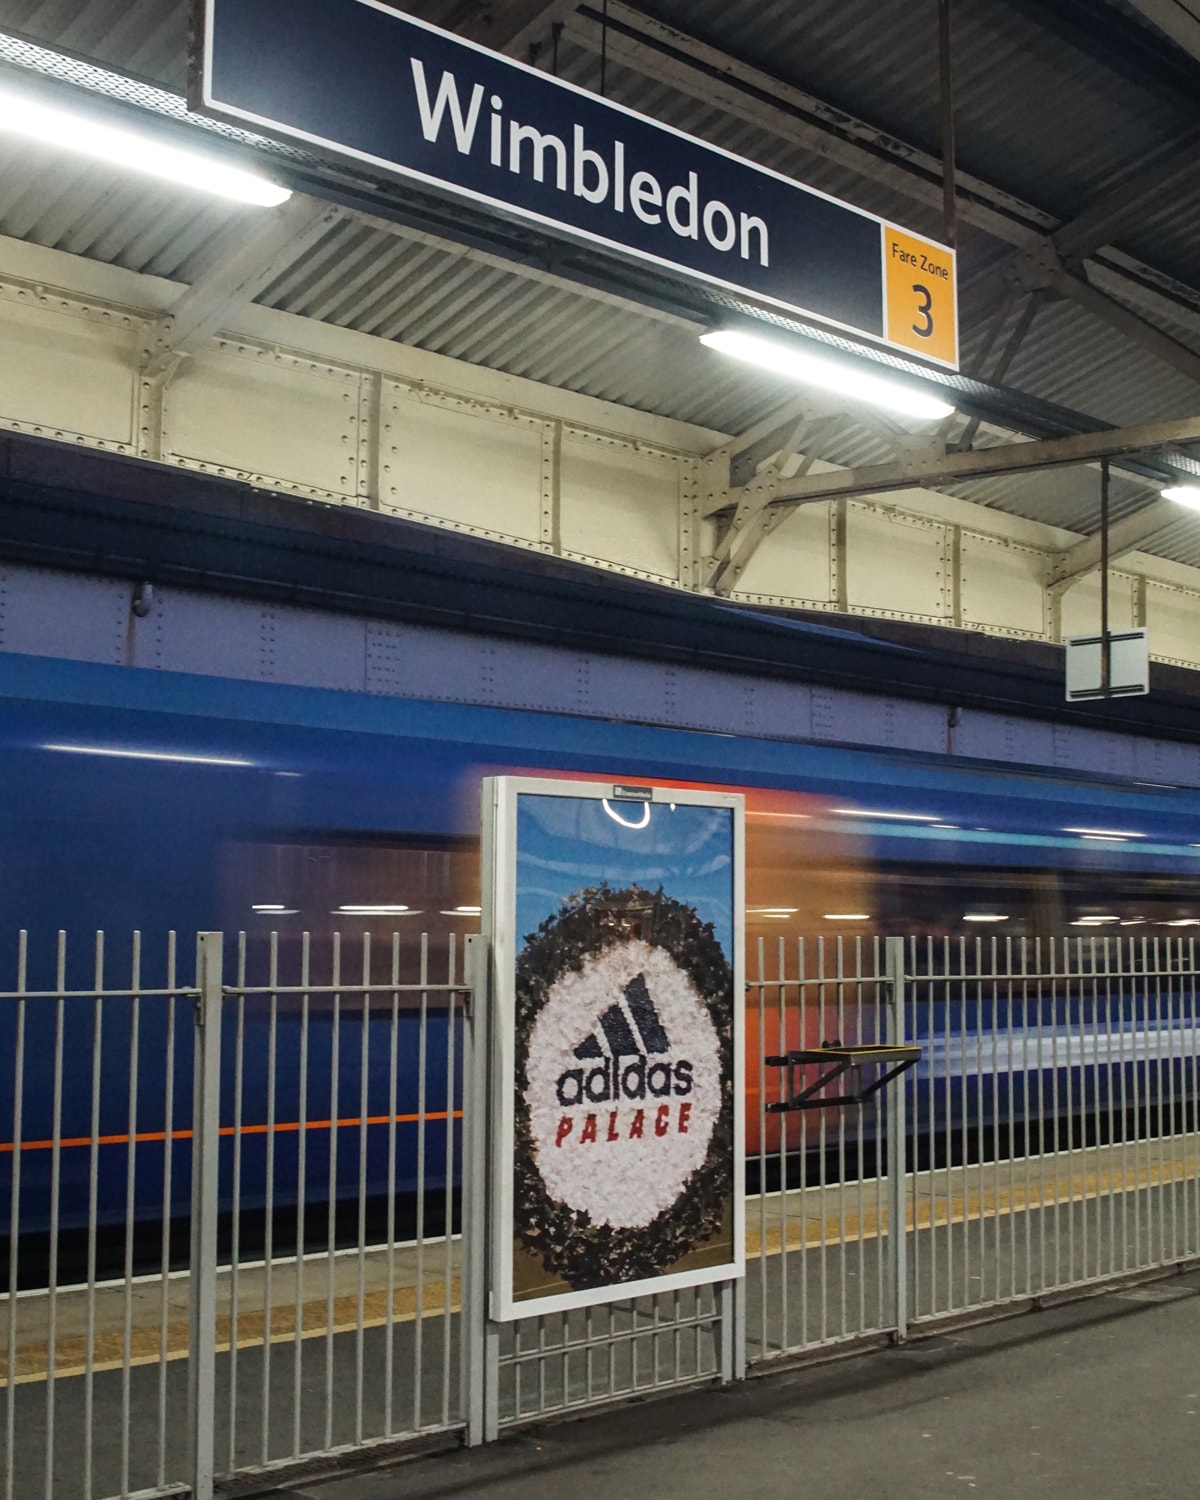 palace adidas collaboration teaser images advertisements poster wimbledon station london imagery spring summer 2018